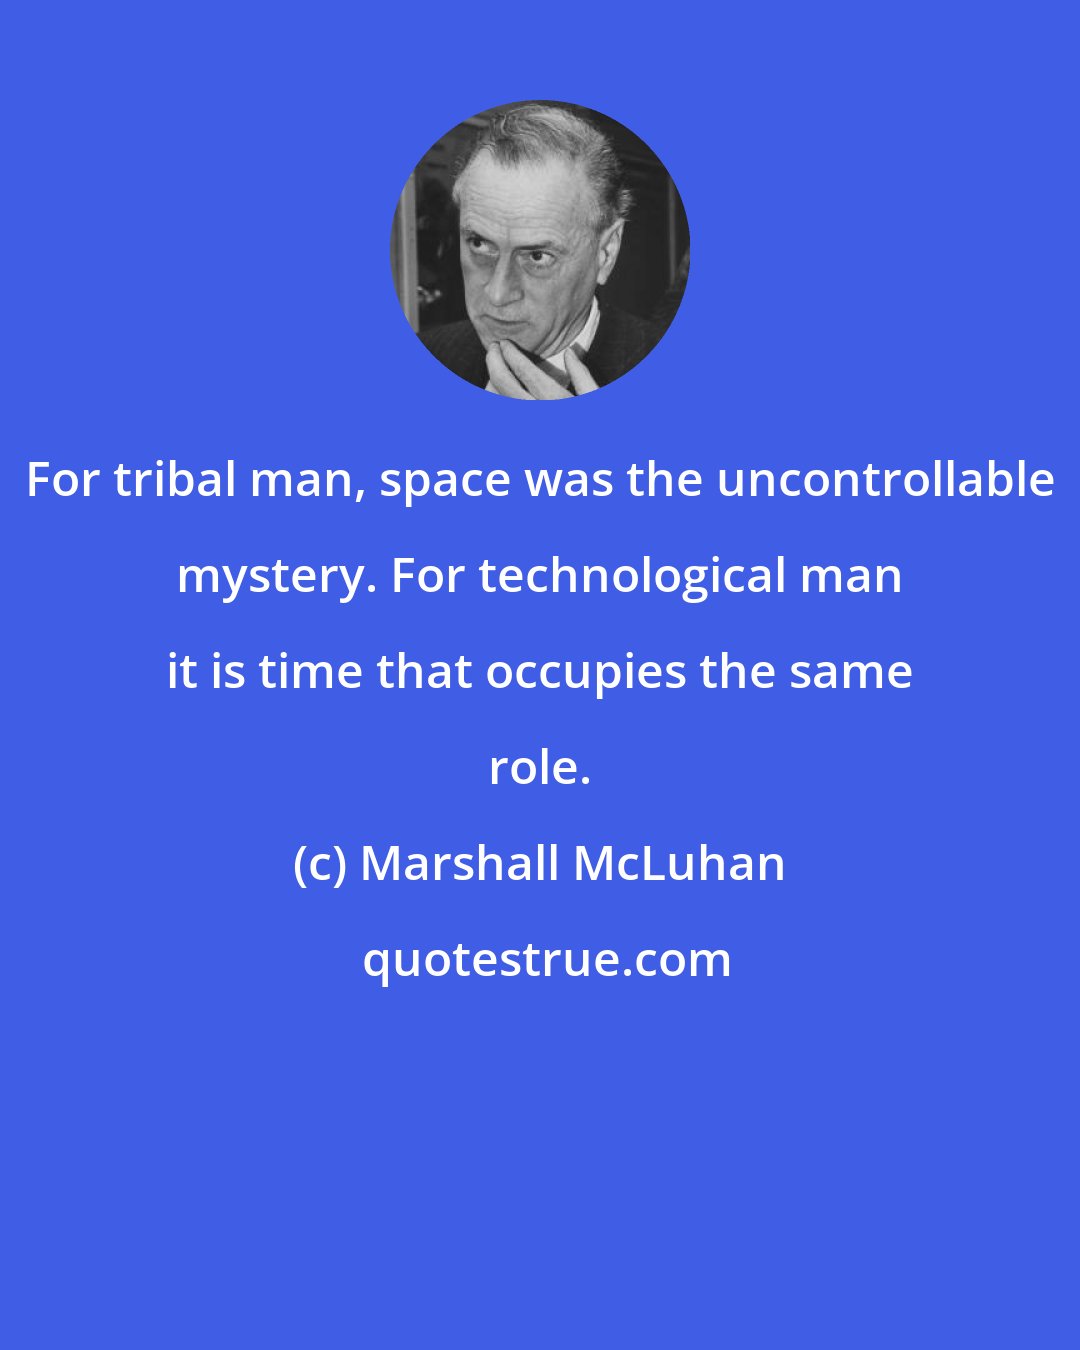 Marshall McLuhan: For tribal man, space was the uncontrollable mystery. For technological man it is time that occupies the same role.